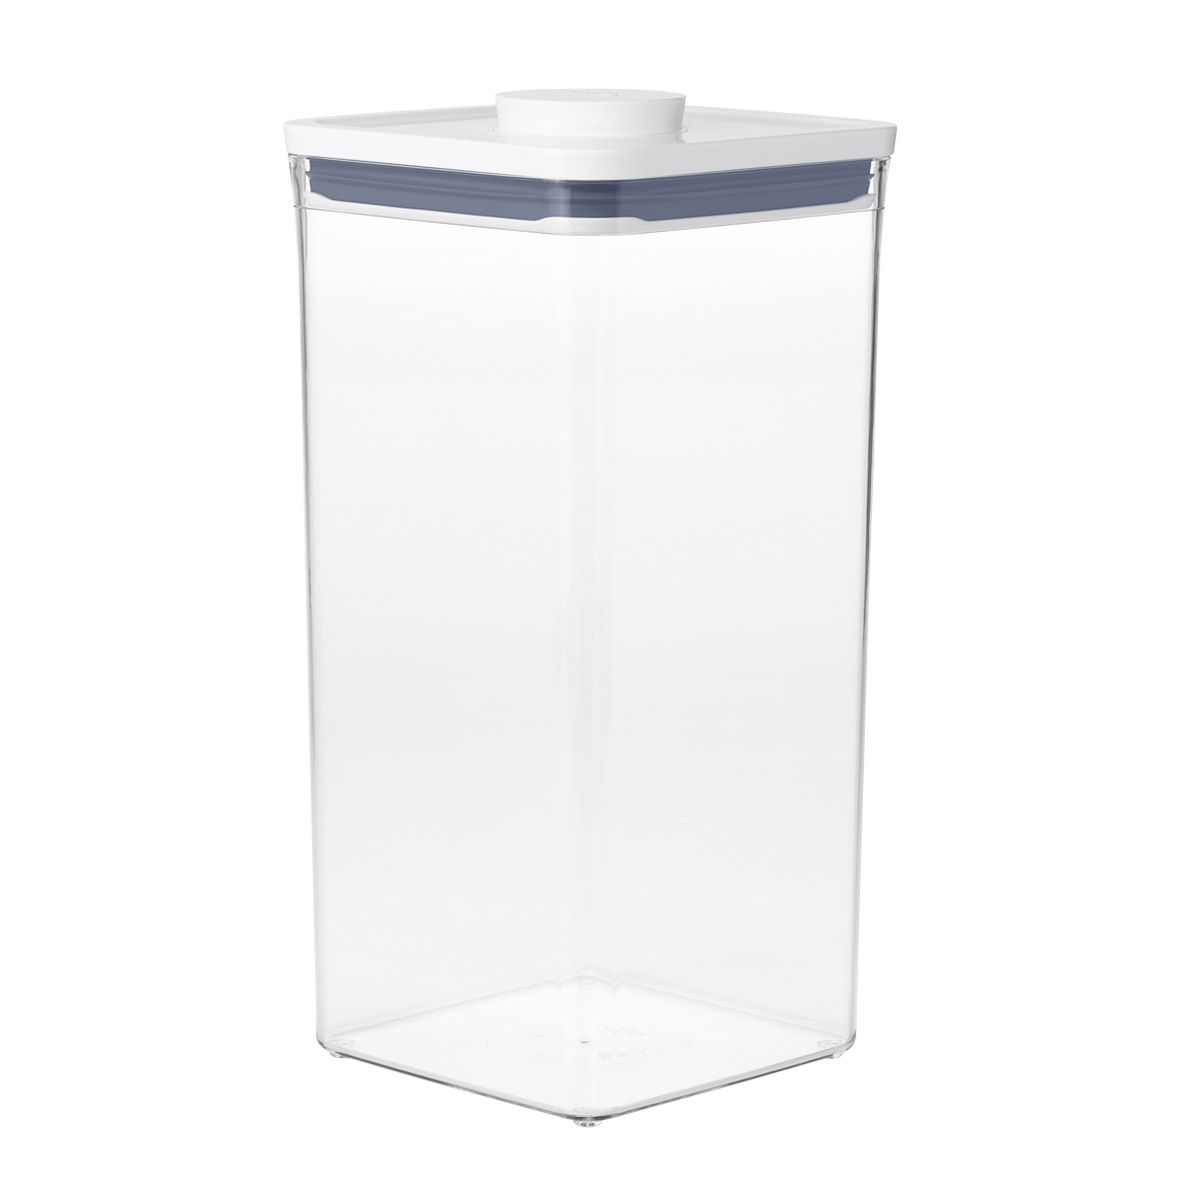 OXO 6 qt. Tall Big Square POP Container | The Container Store